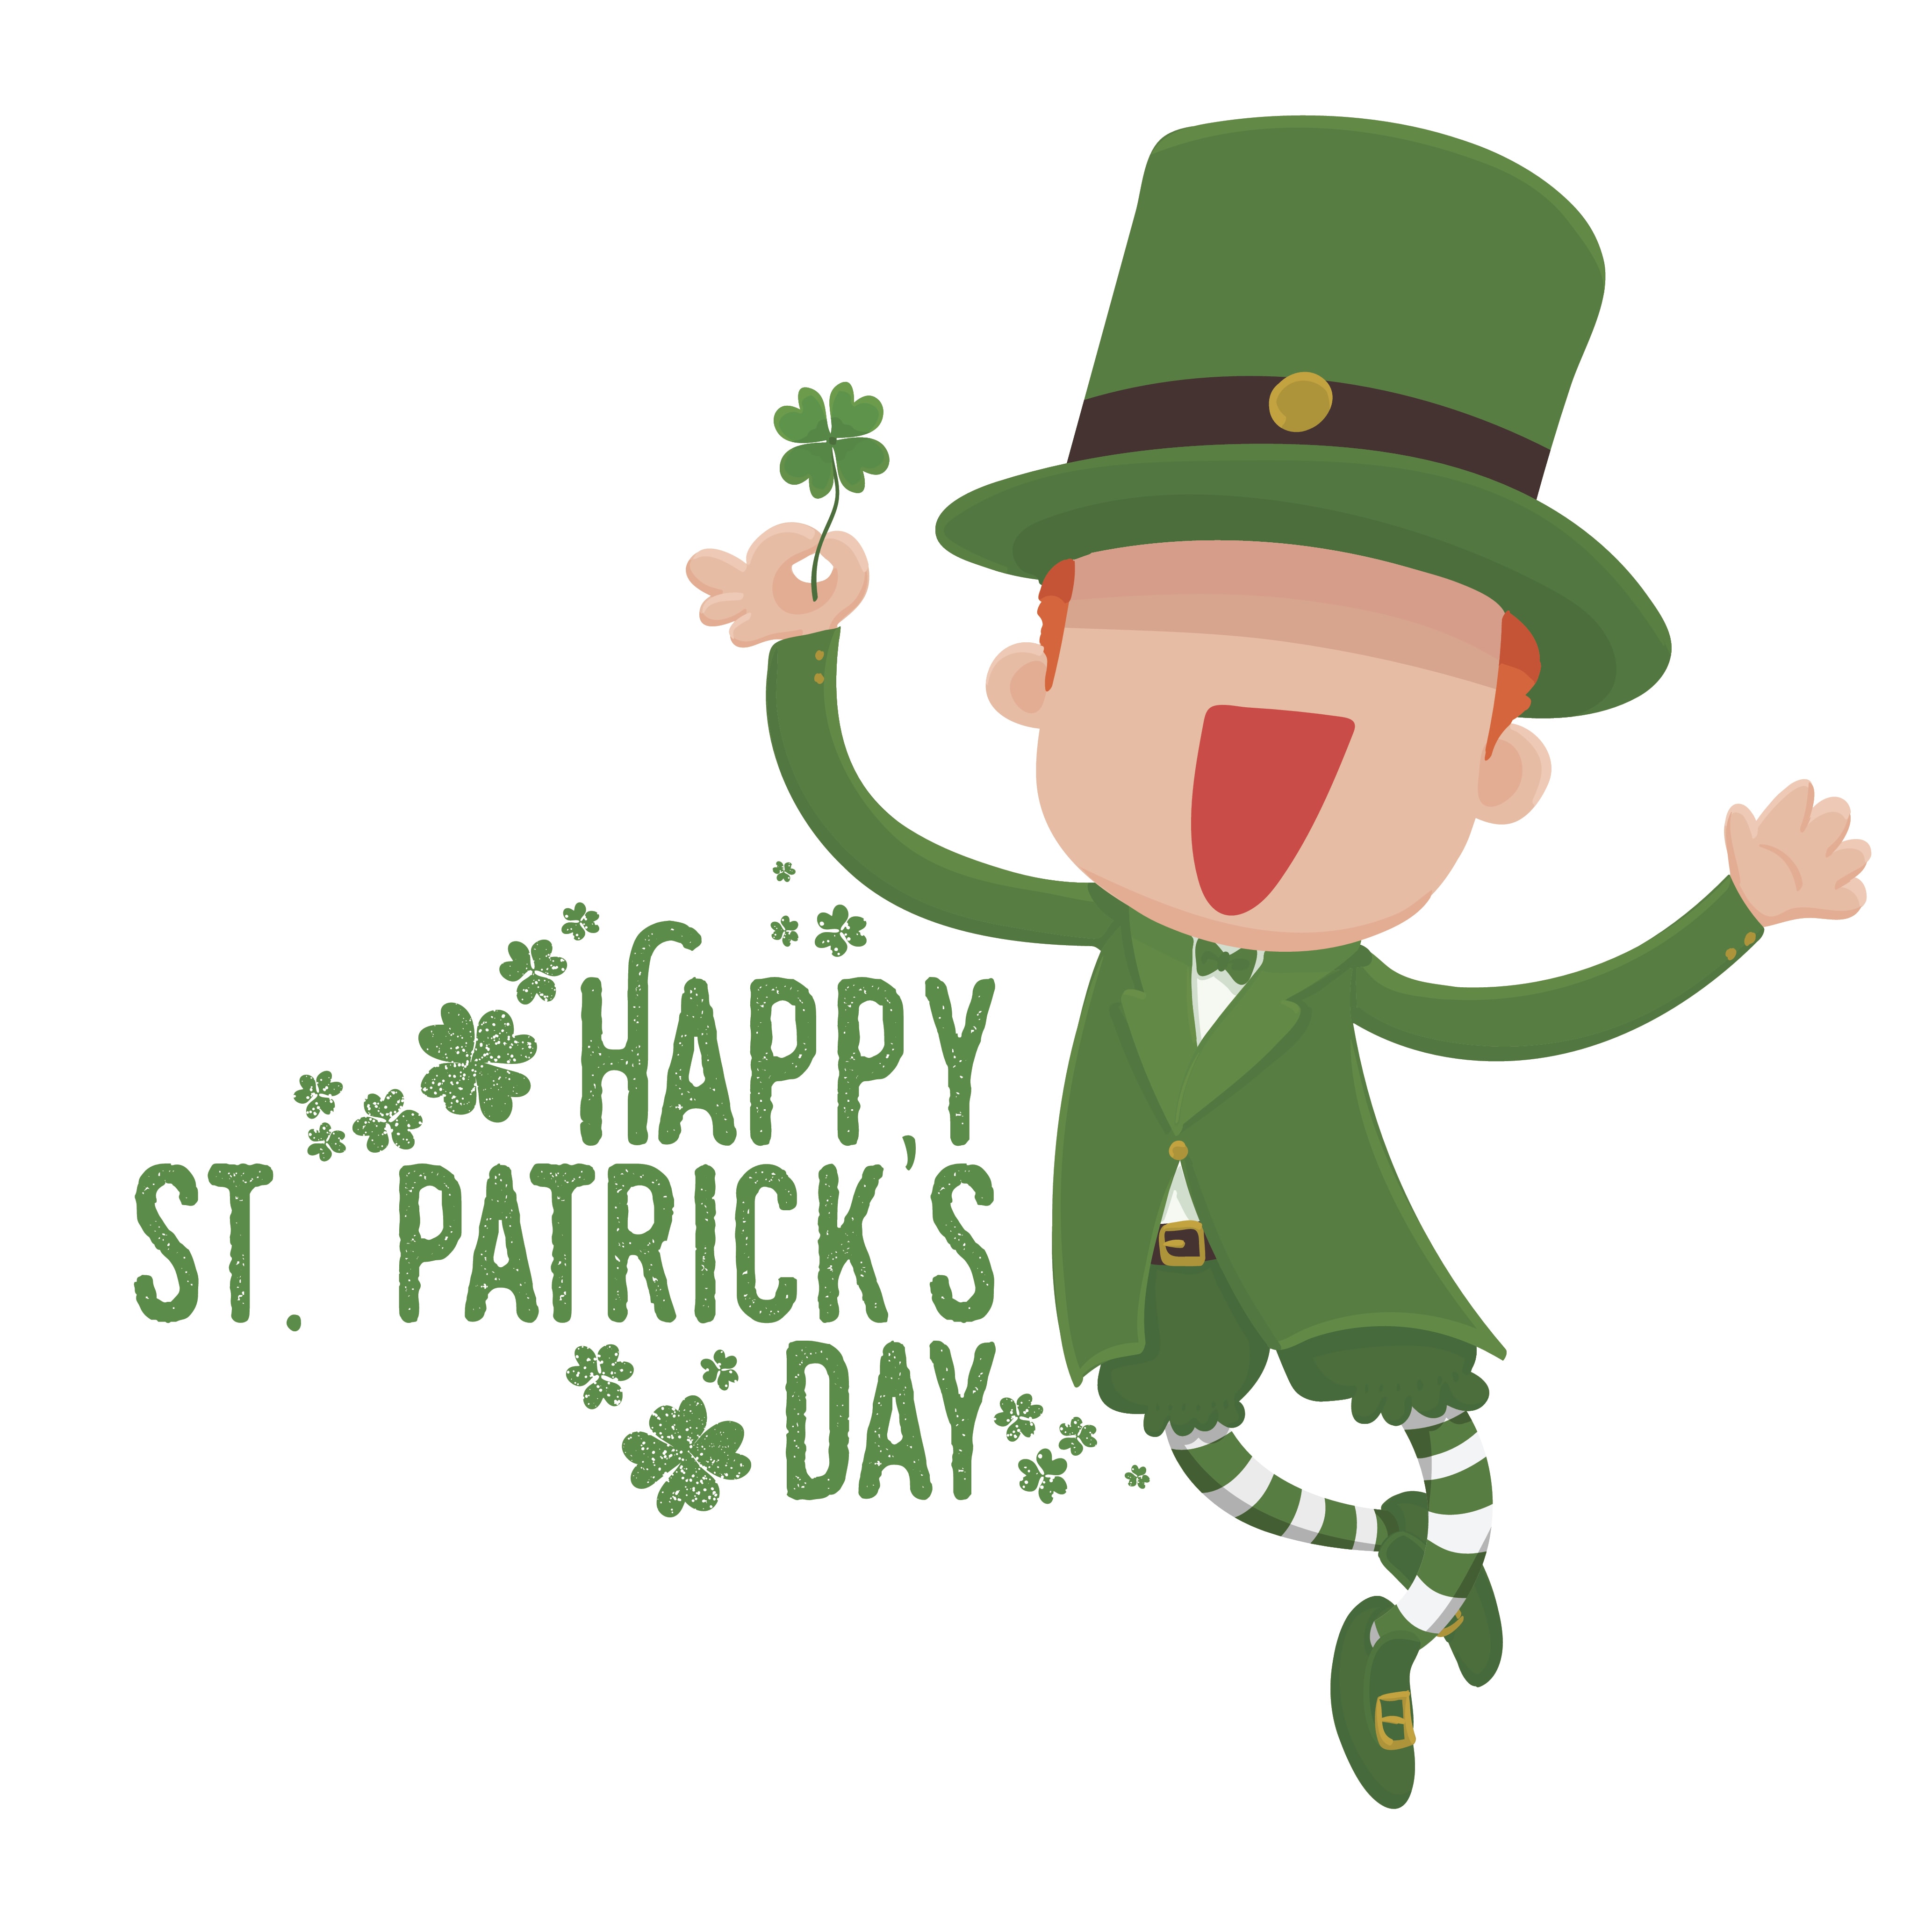 Happy St. Patrick's Day from AEC Living AEC Living